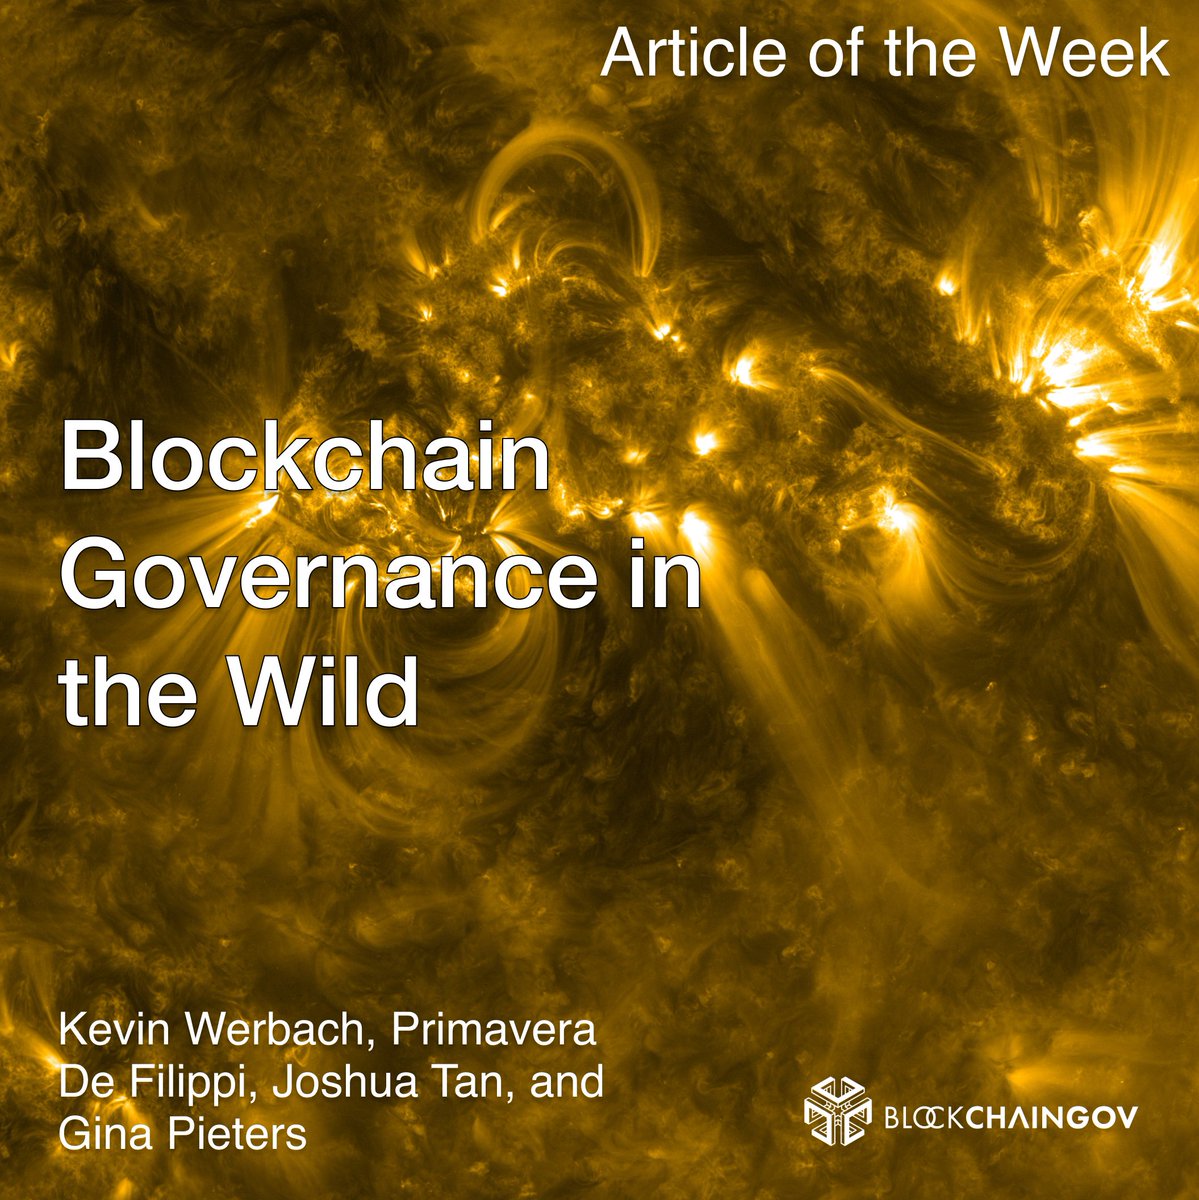 🔍 Article of the Week An exploration of governance across 23 projects, examining formal and informal practices for insights into decentralized decision-making. By @kwerb, @yaoeo, @joshuaztan & @ProfPieters. tinyurl.com/bdenpaxh Check the whole issue out on @mitpress!